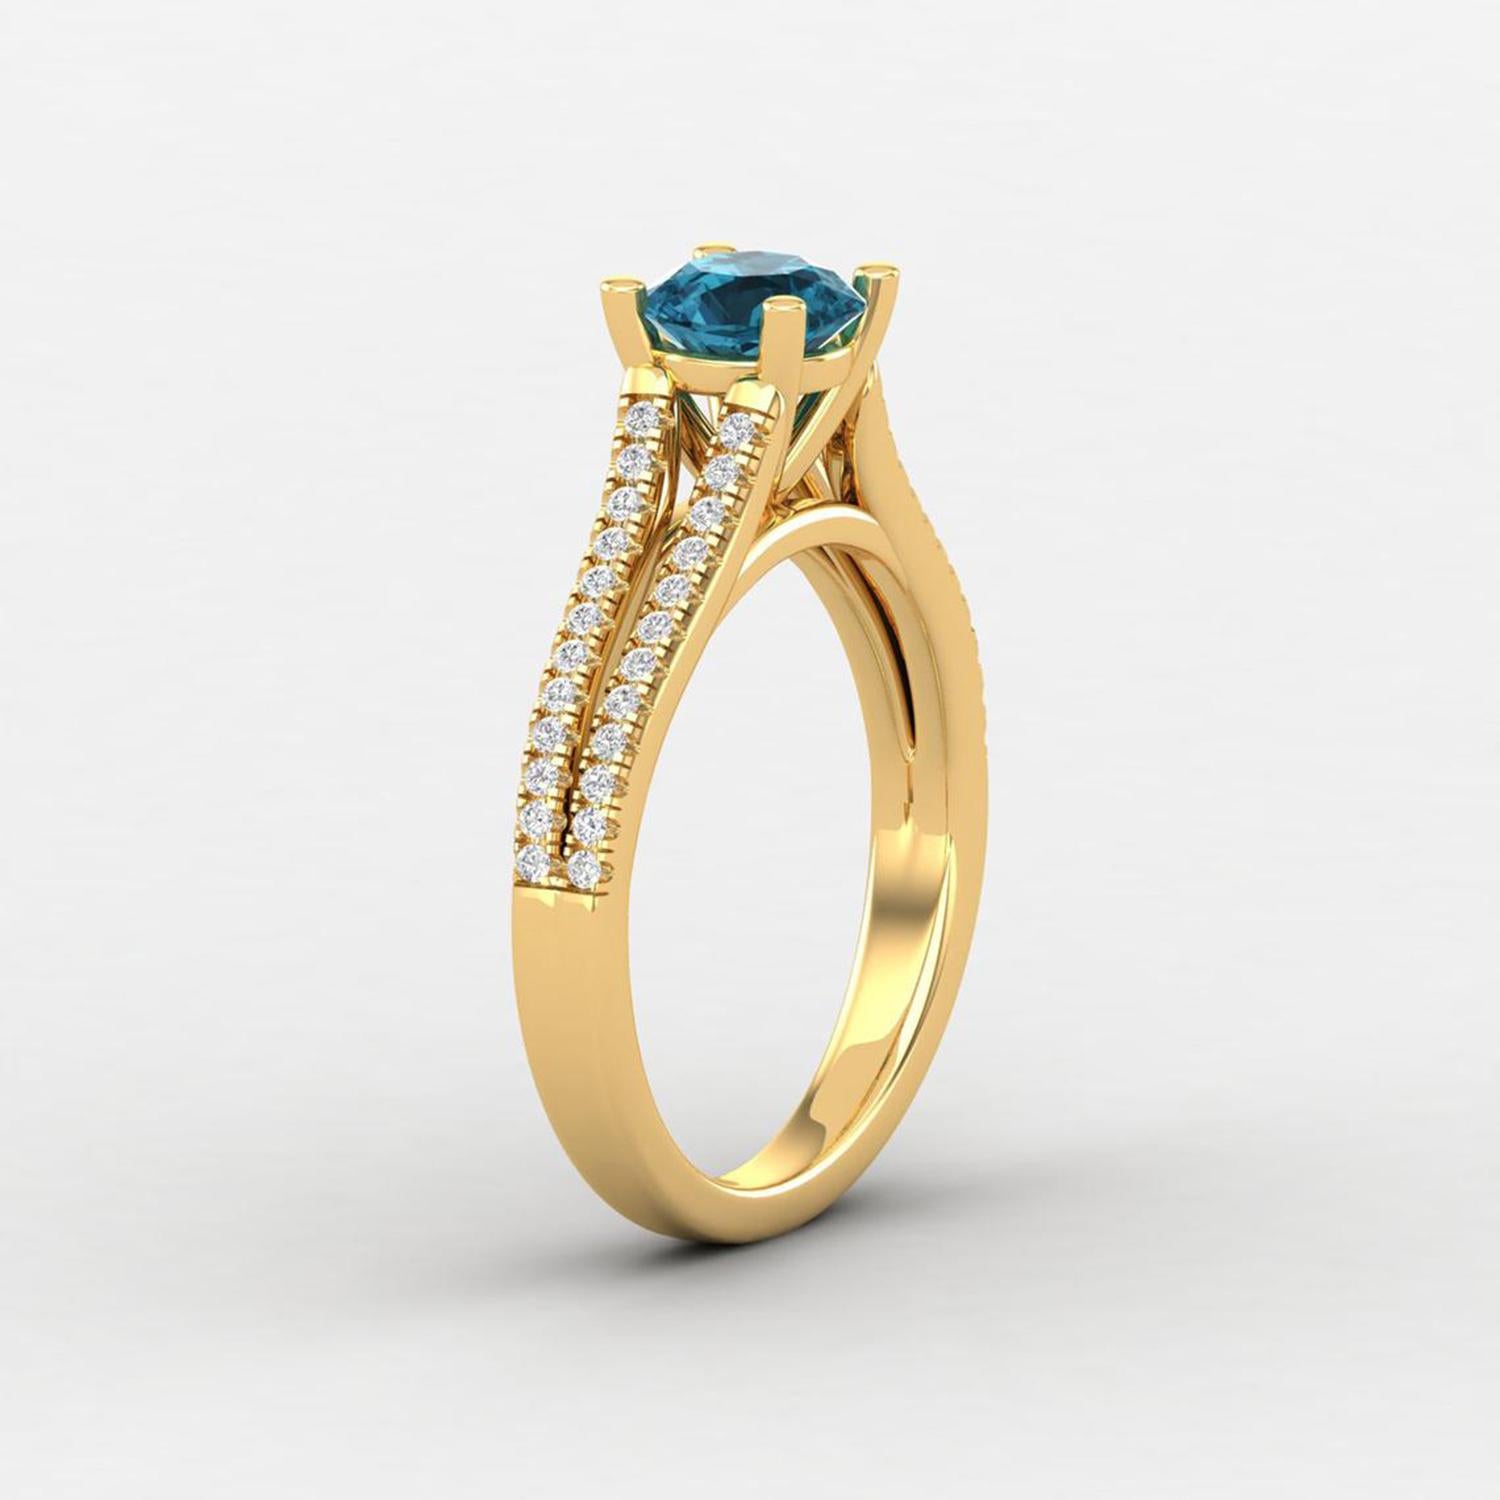 Round Cut 14 K Gold Blue Topaz Ring / Diamond Solitaire Ring / Ring for Her For Sale